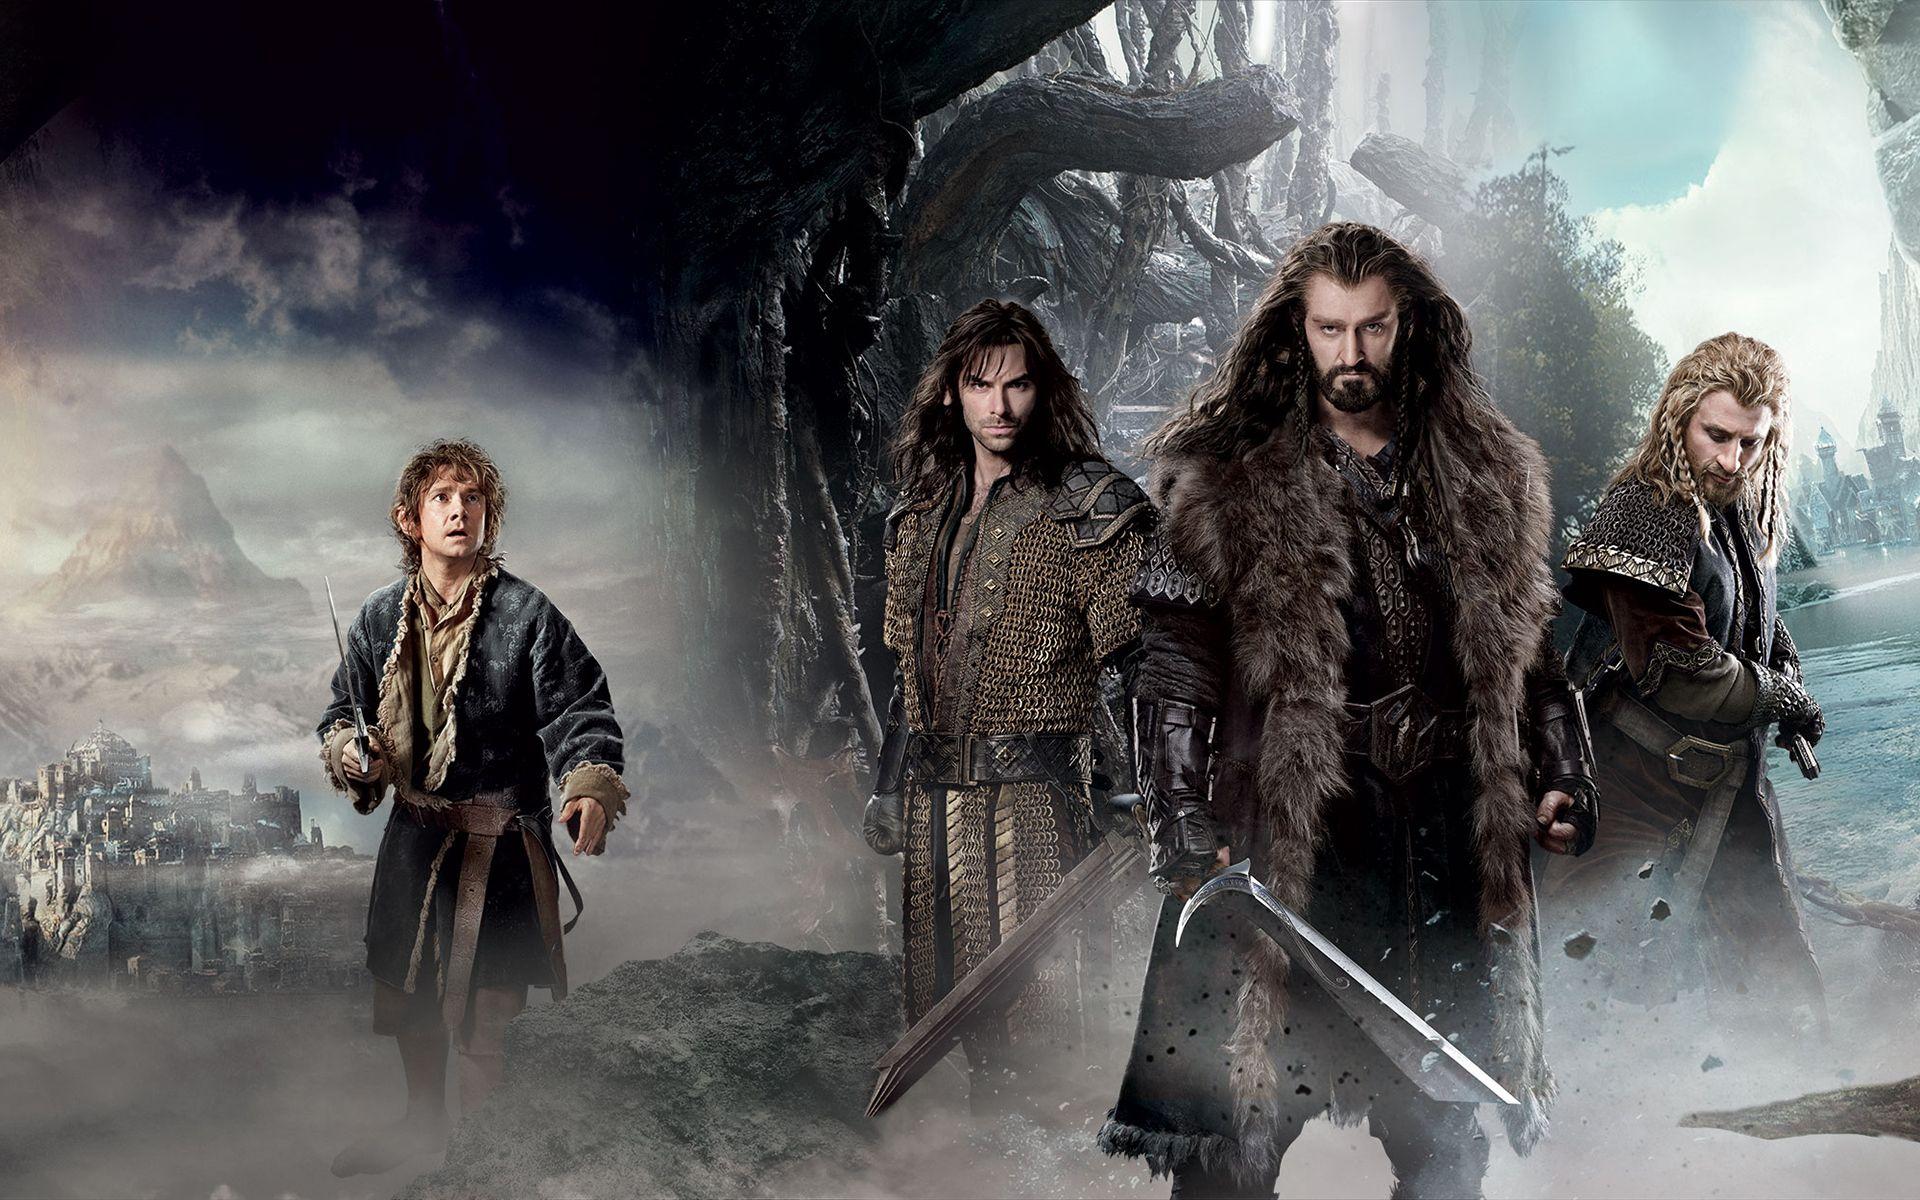 The Hobbit: The Desolation of Smaug. The Hobbit Trilogy